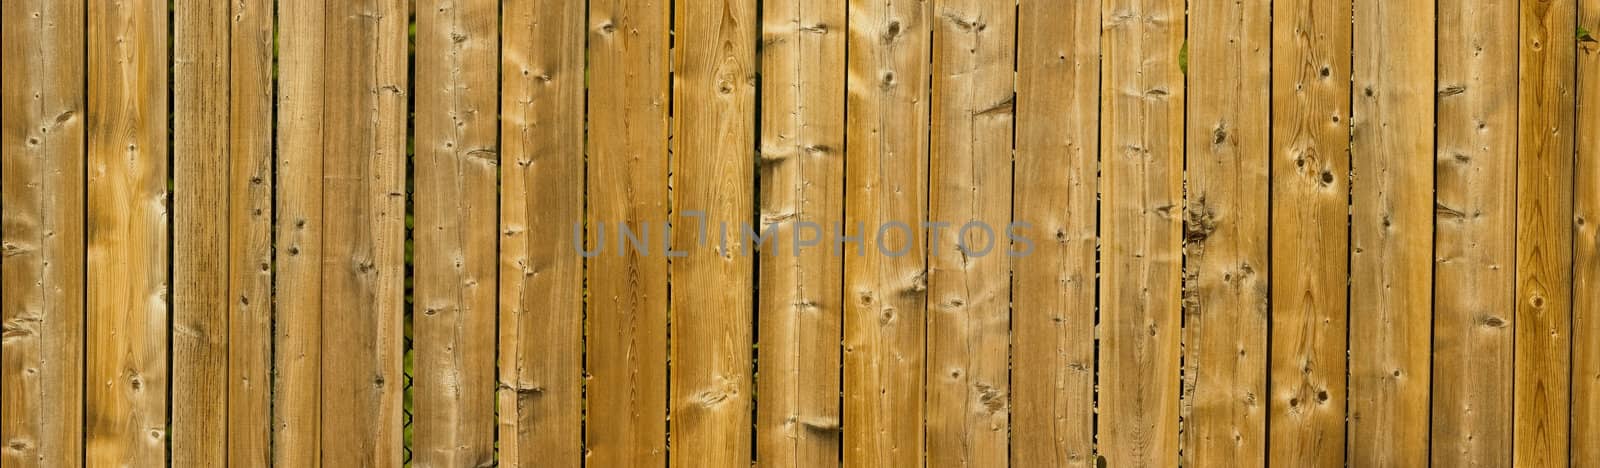 Very Wide Panoramic Abstract Wooden Background Texture